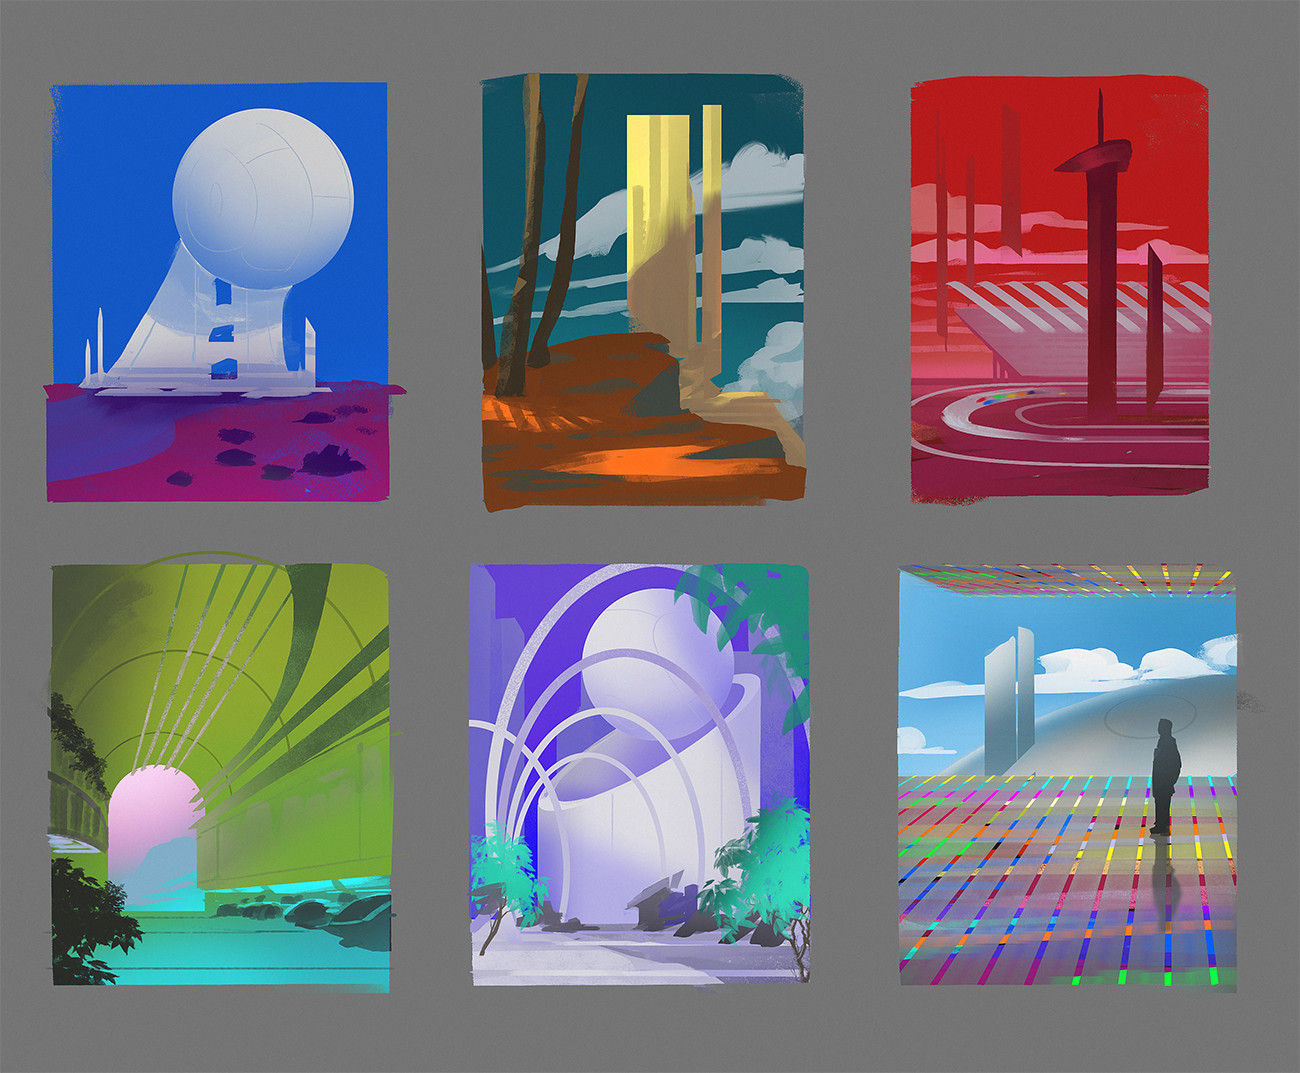 Thumbnails for project Canterbury scifi themed level.